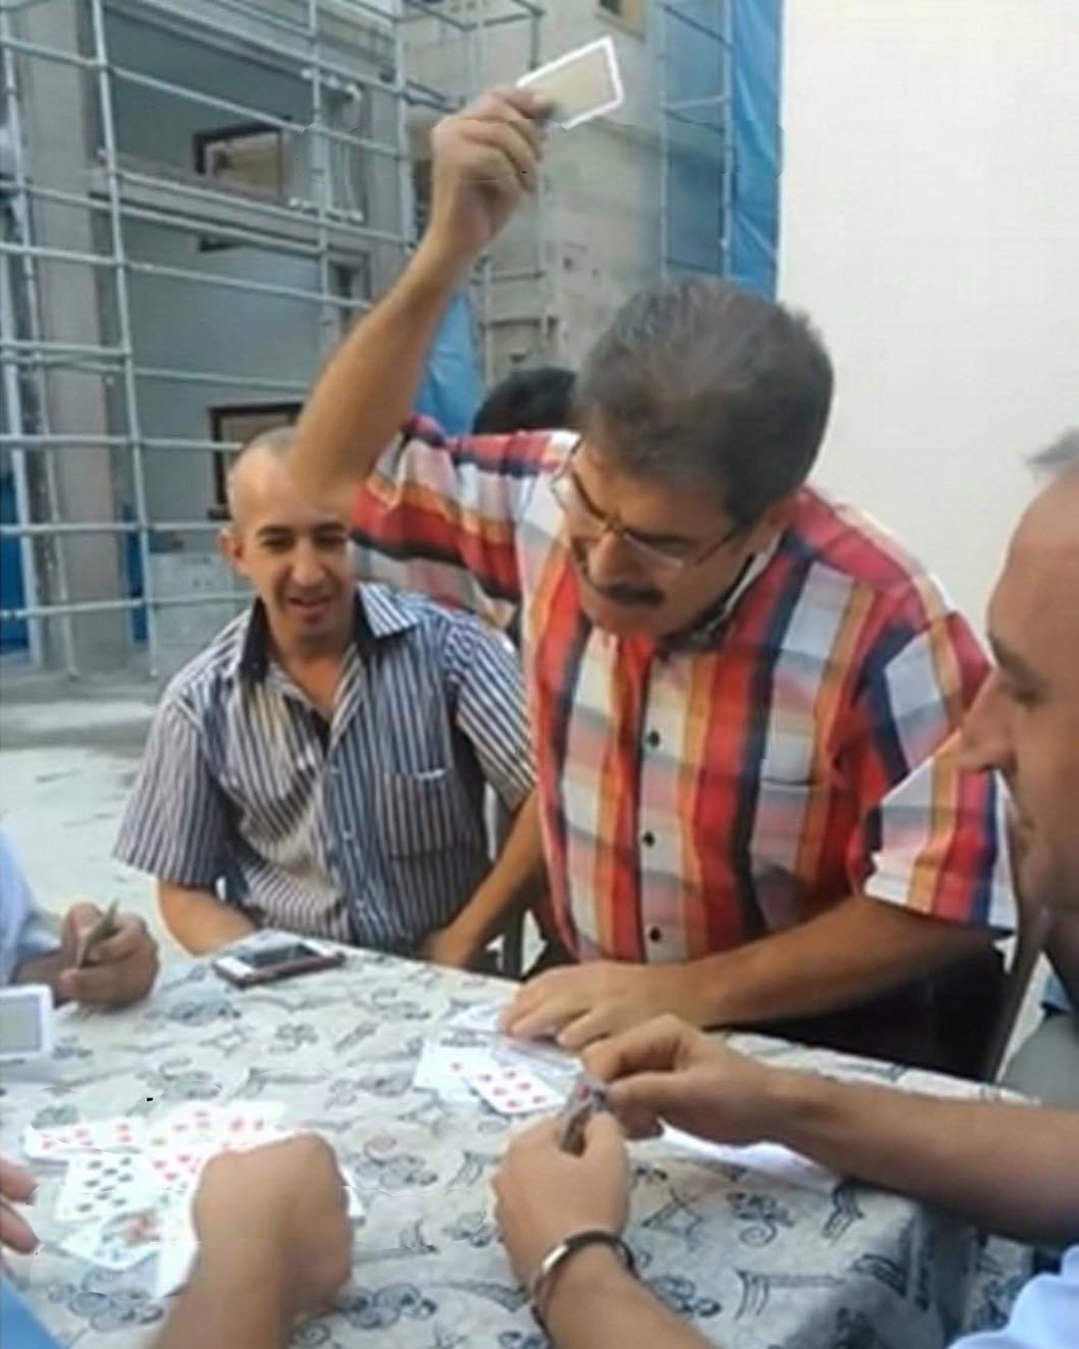 Any Value In This Turkish Man Furiously Playing Cards Memeeconomy